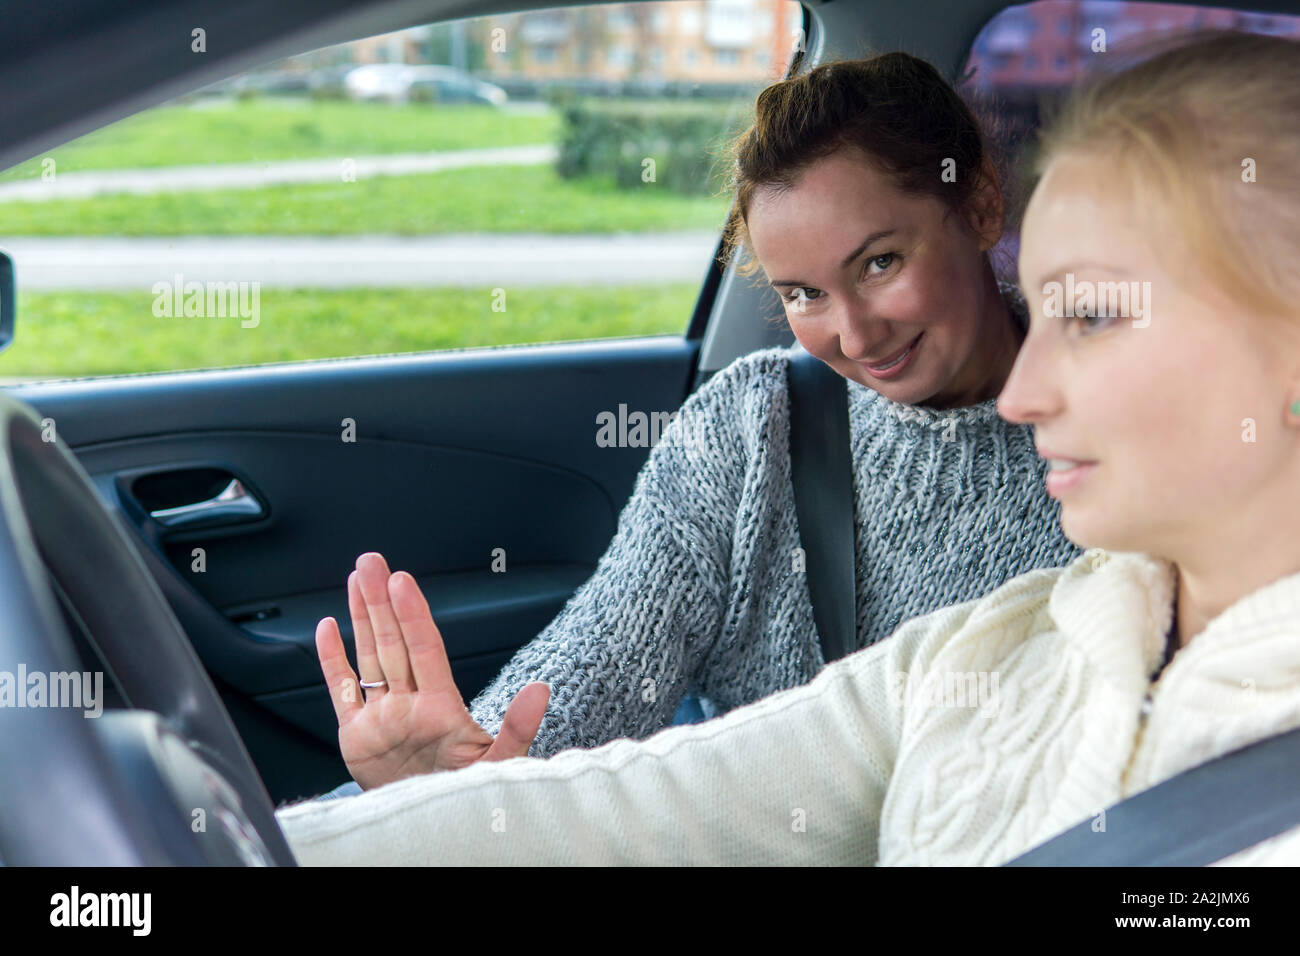 female instructor waves a friendly hand during a driving lesson with a female student Stock Photo